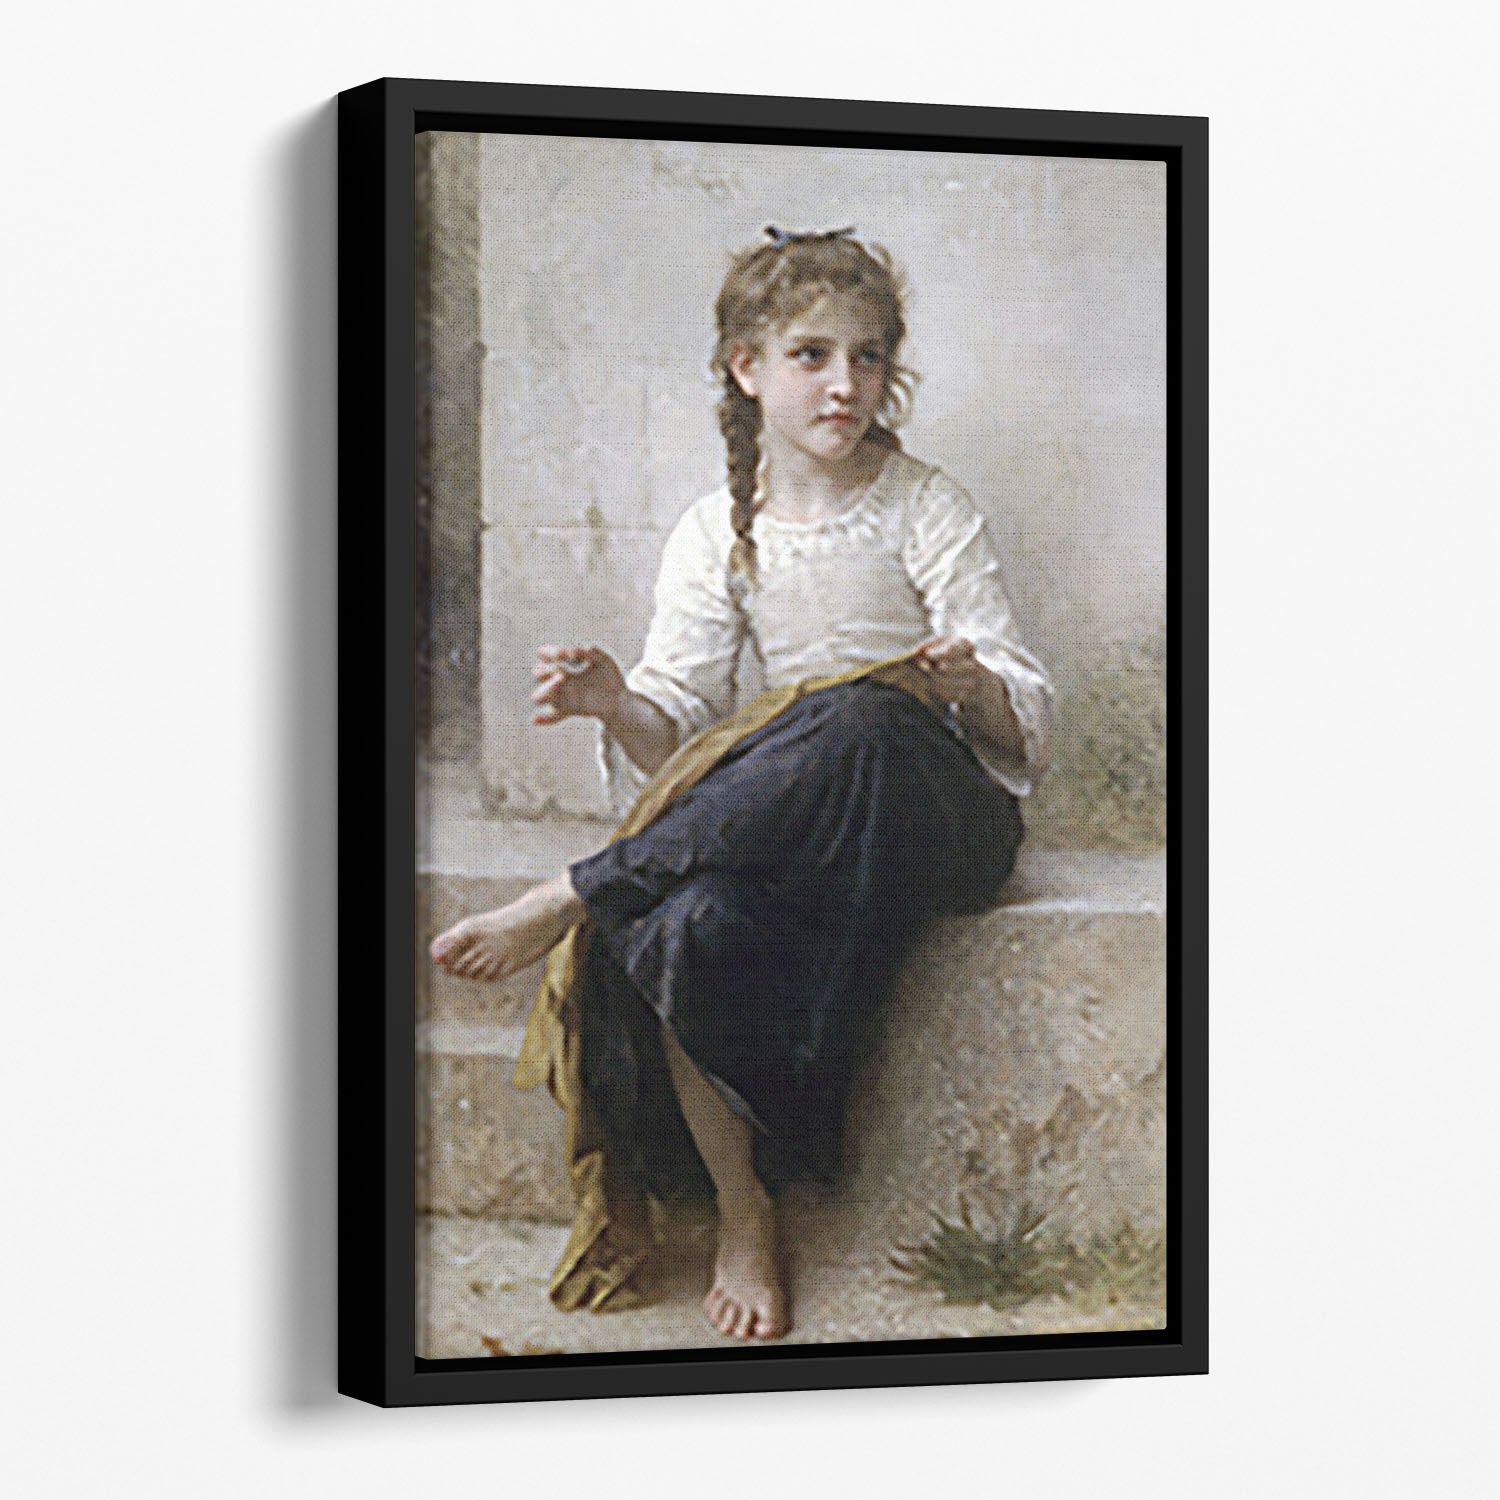 Sewing By Bouguereau Floating Framed Canvas